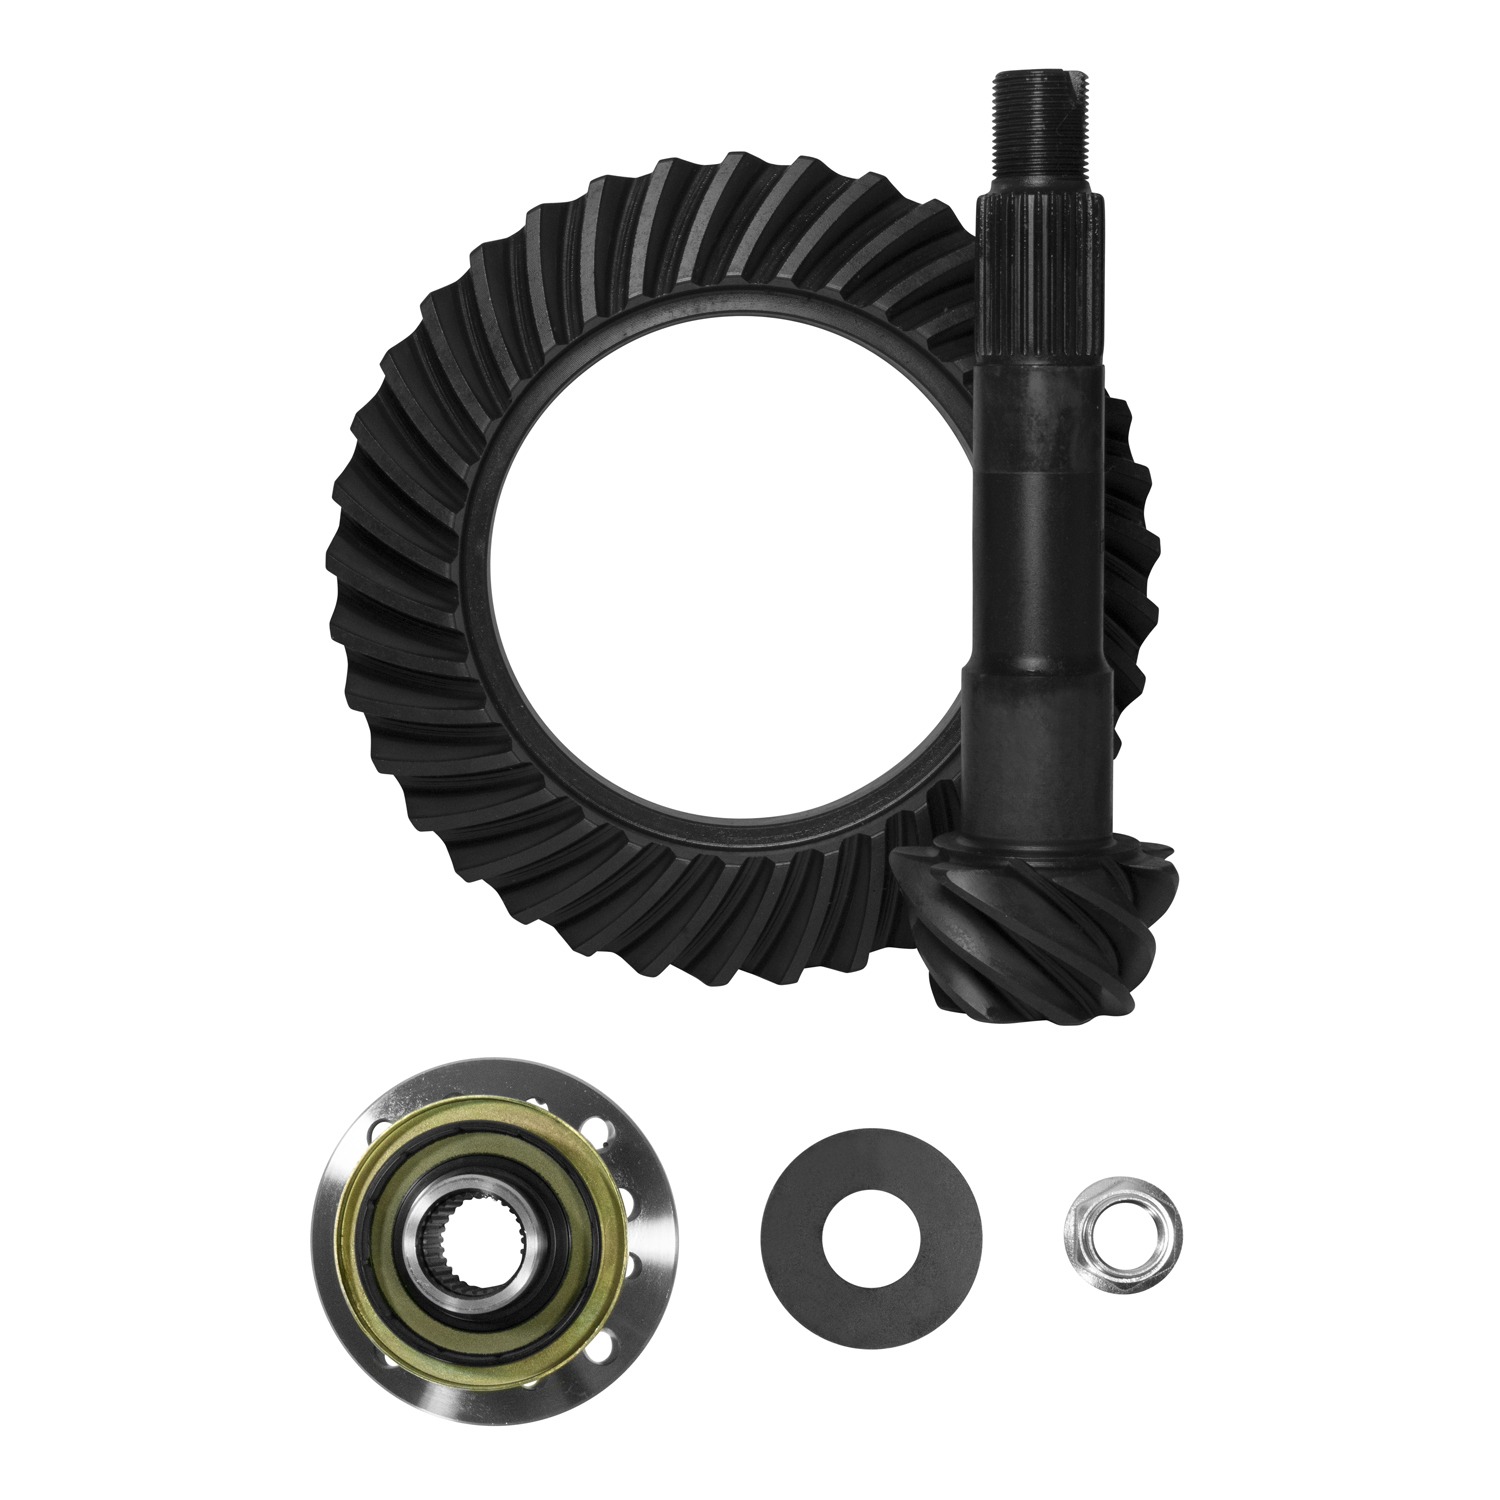 High performance Yukon Ring & Pinion gear set for Toyota V6 in a 4.11 ratio 